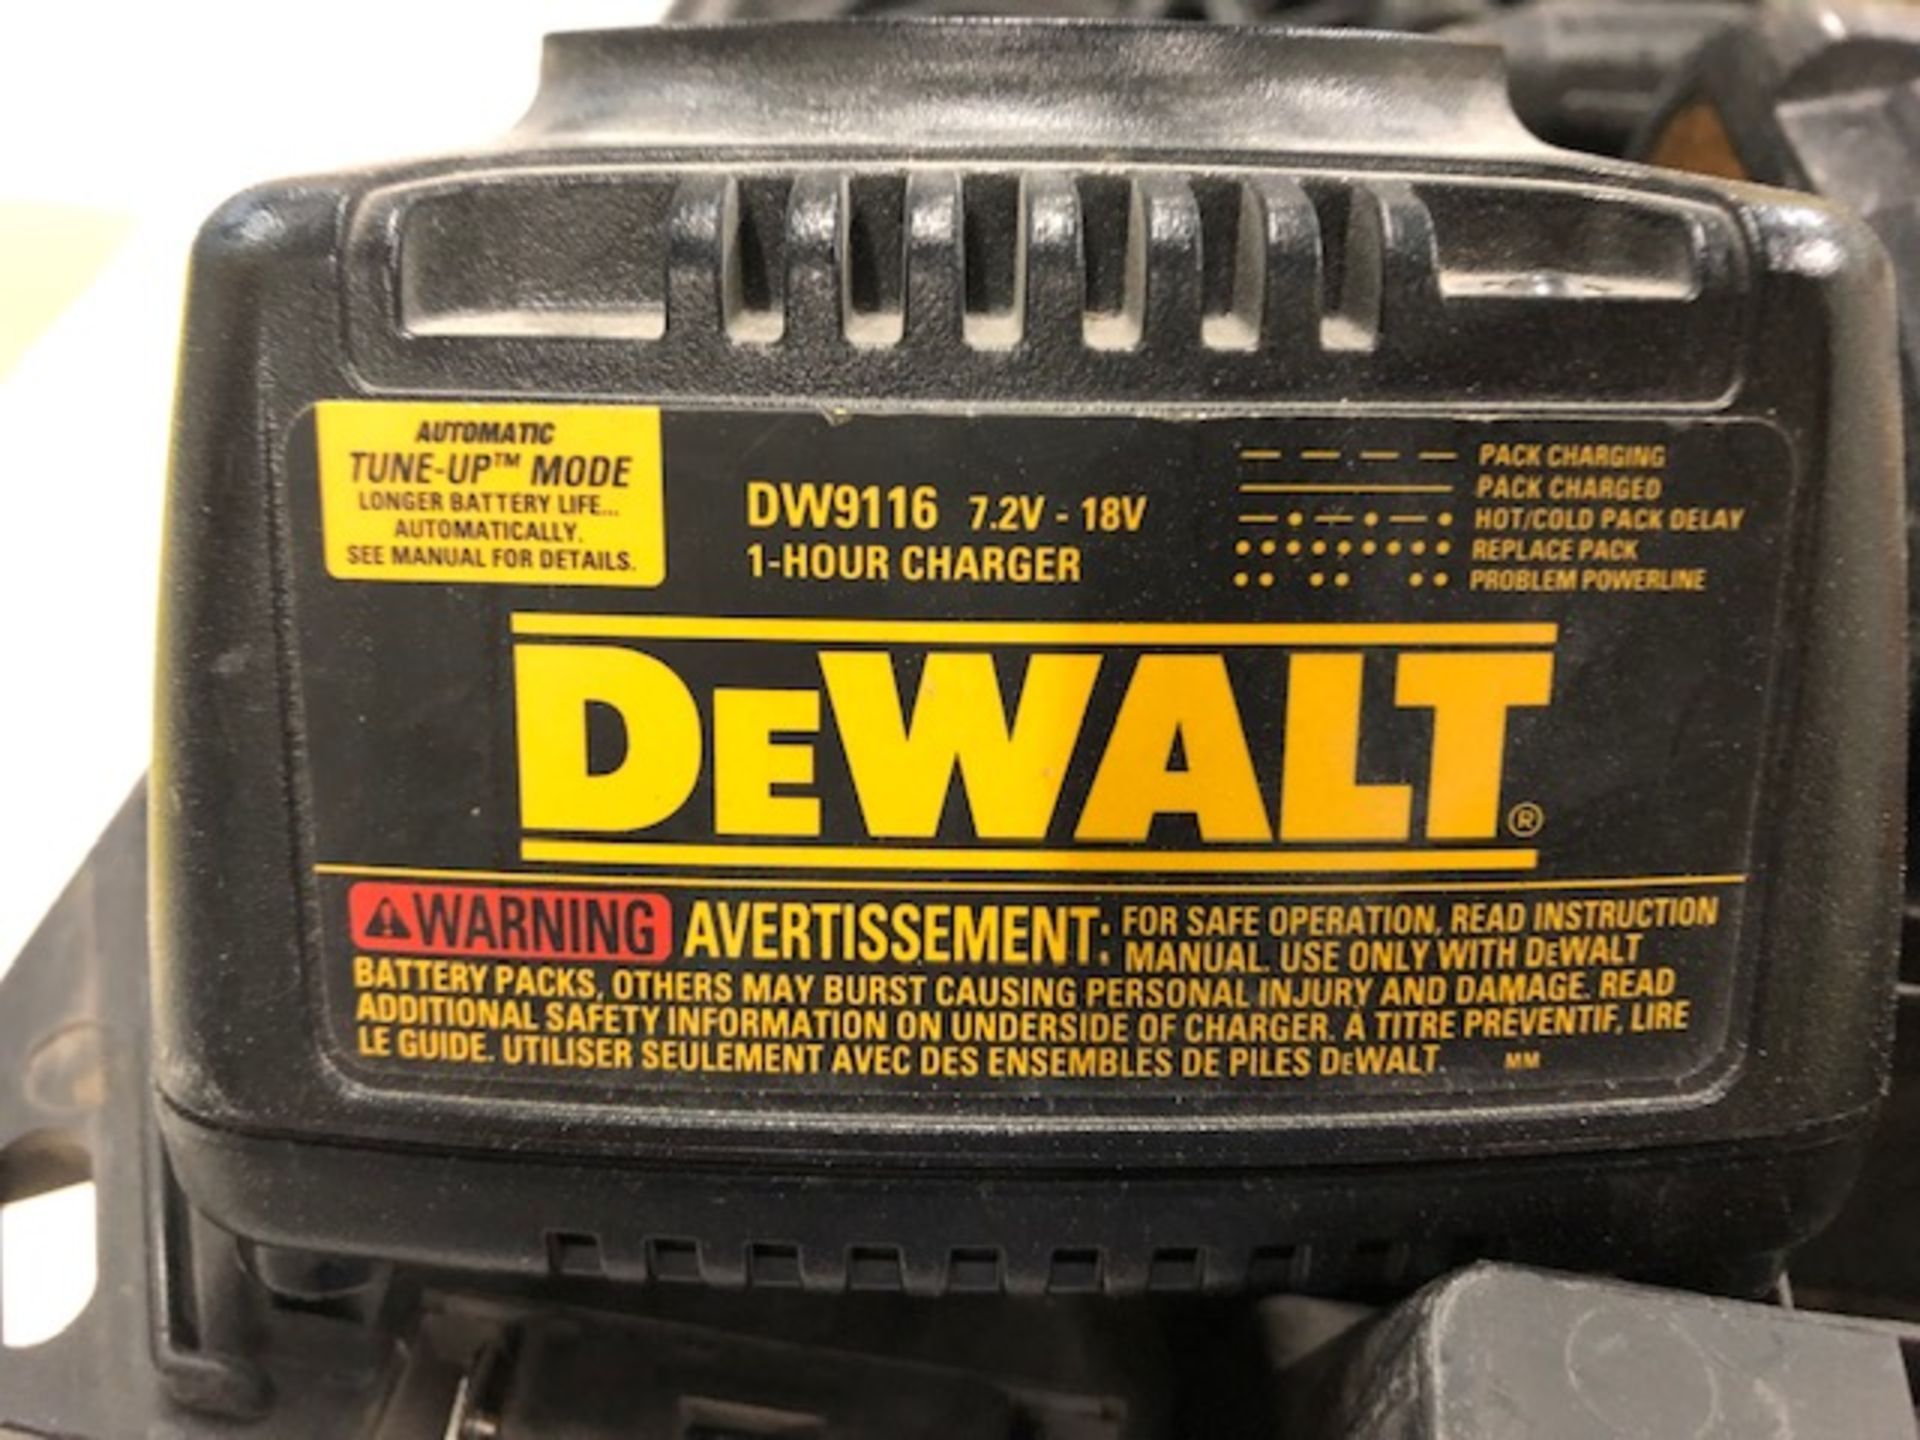 DEWALT, DC759 18V BATTERY POWERED DRILL WITH CHARGER - Image 3 of 4